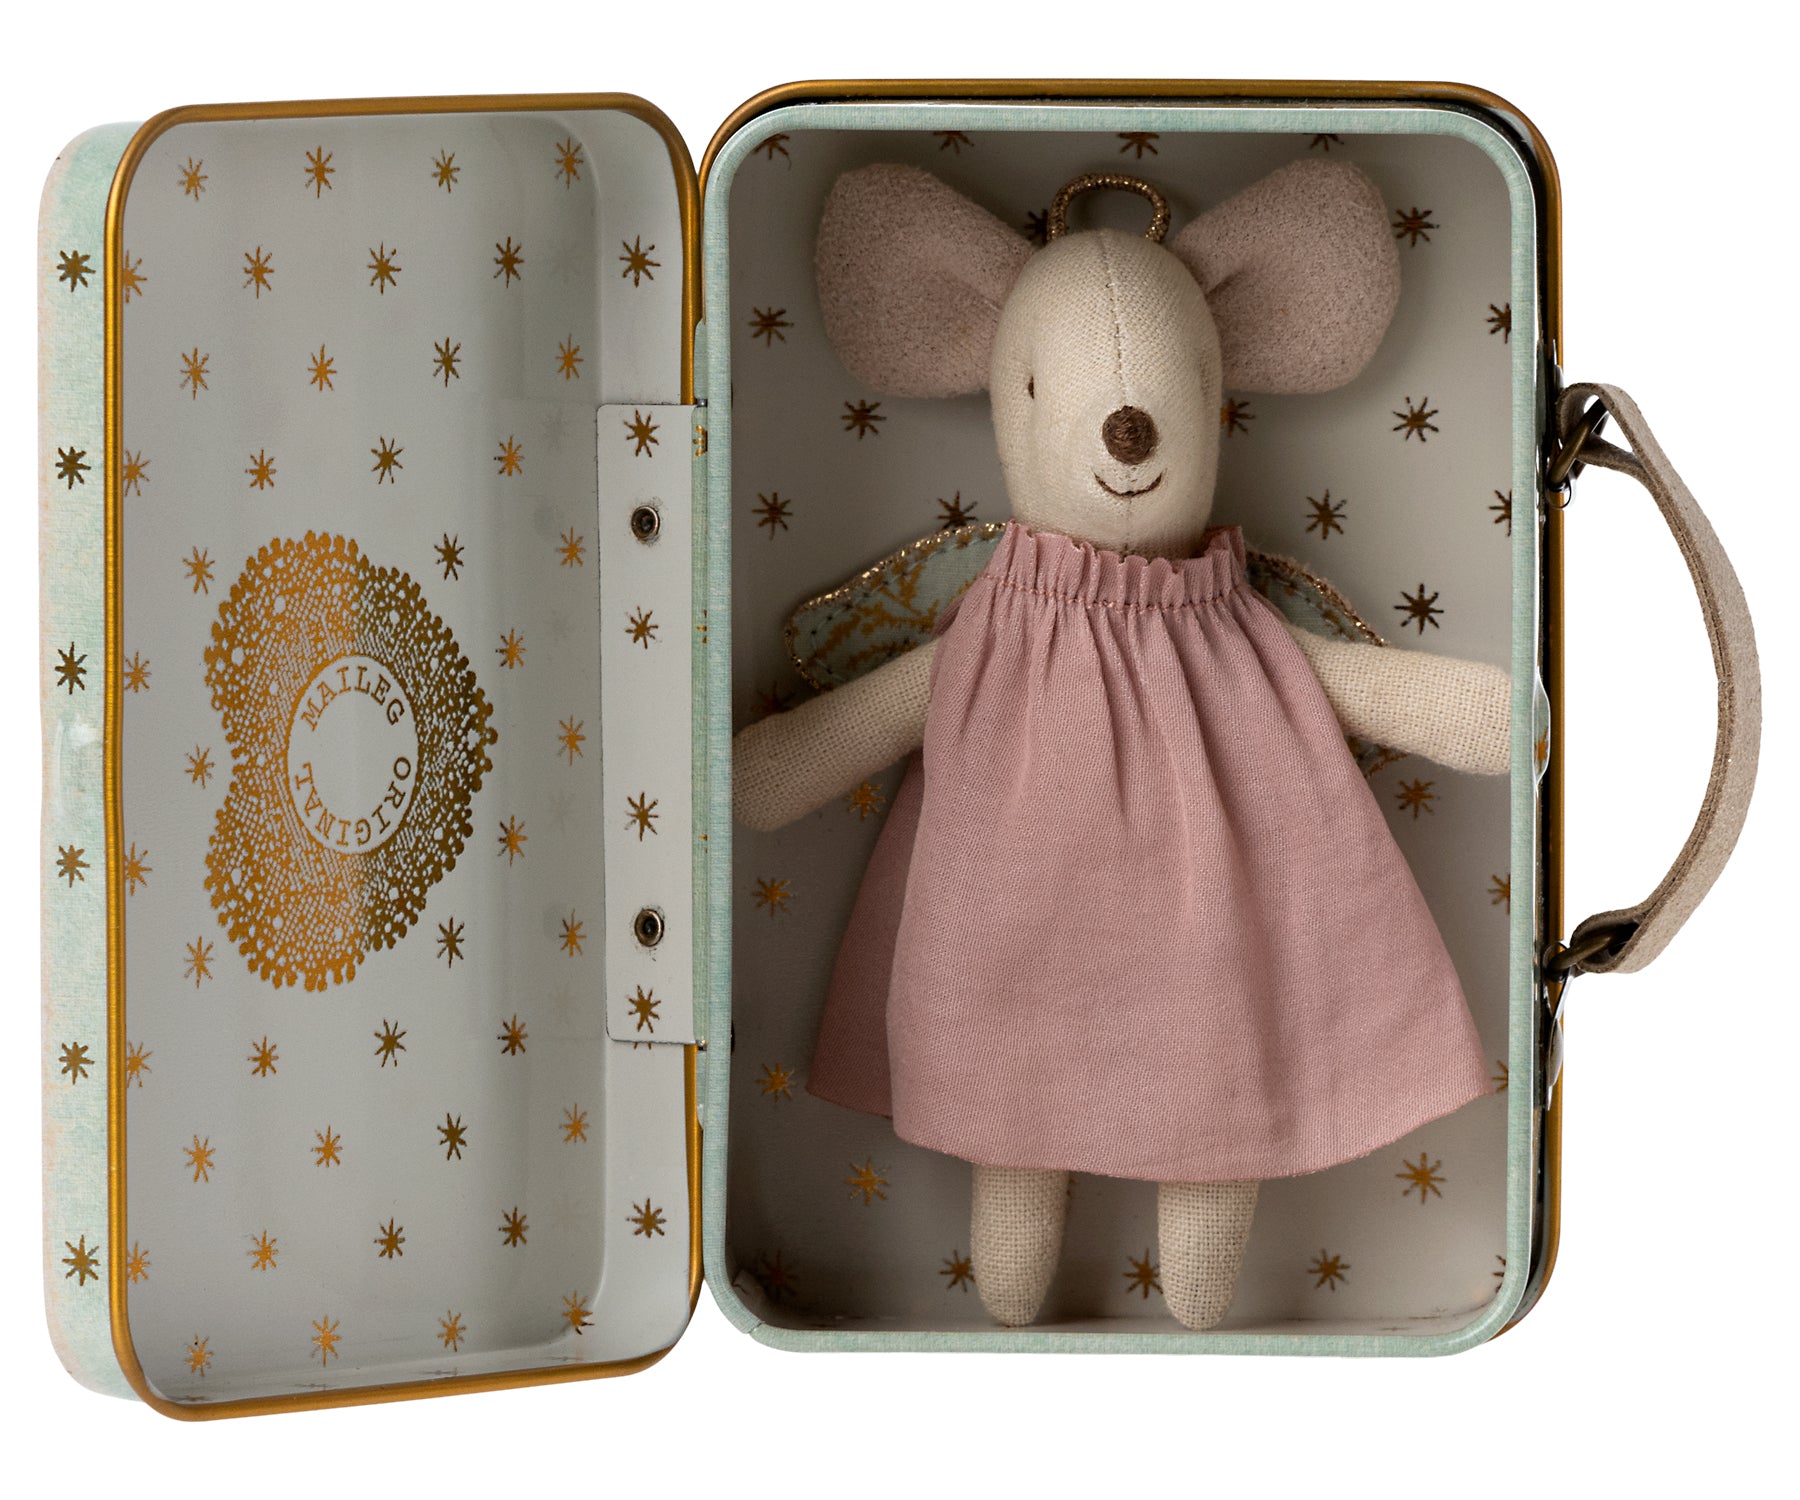 Maileg Guardian Angel Mouse in Suitcase – Little Sister